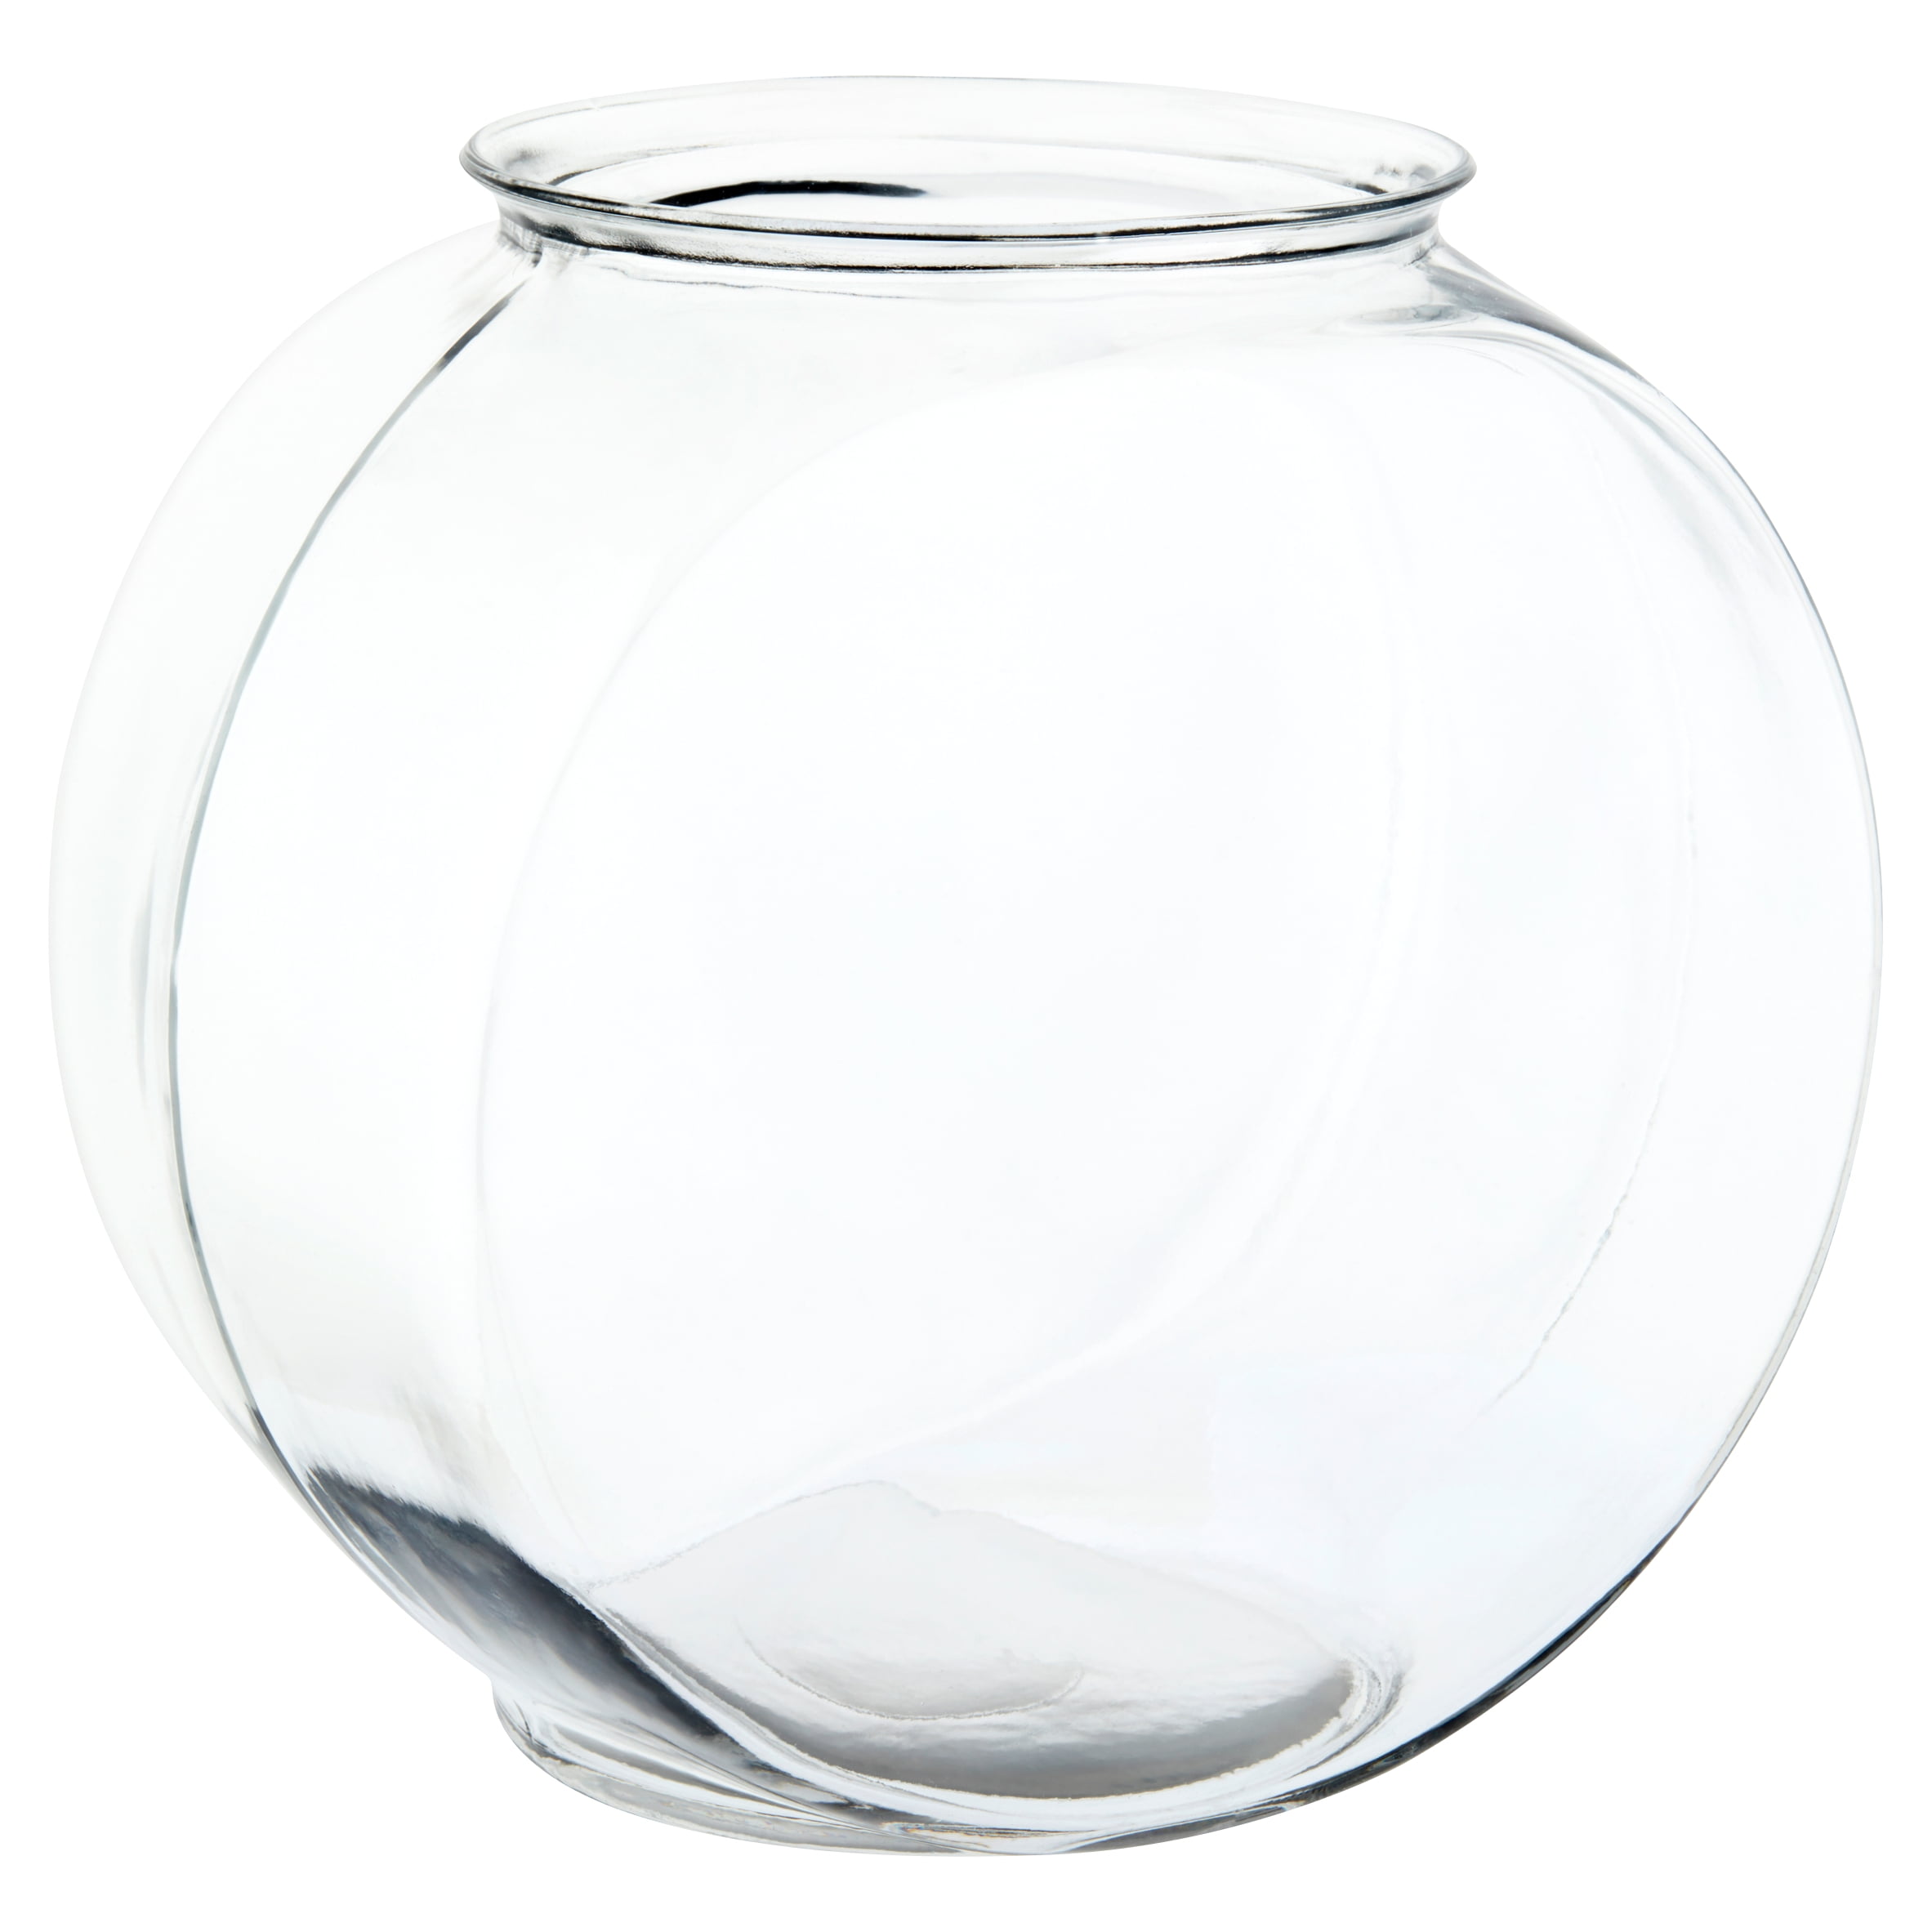 glass fish bowl with lid